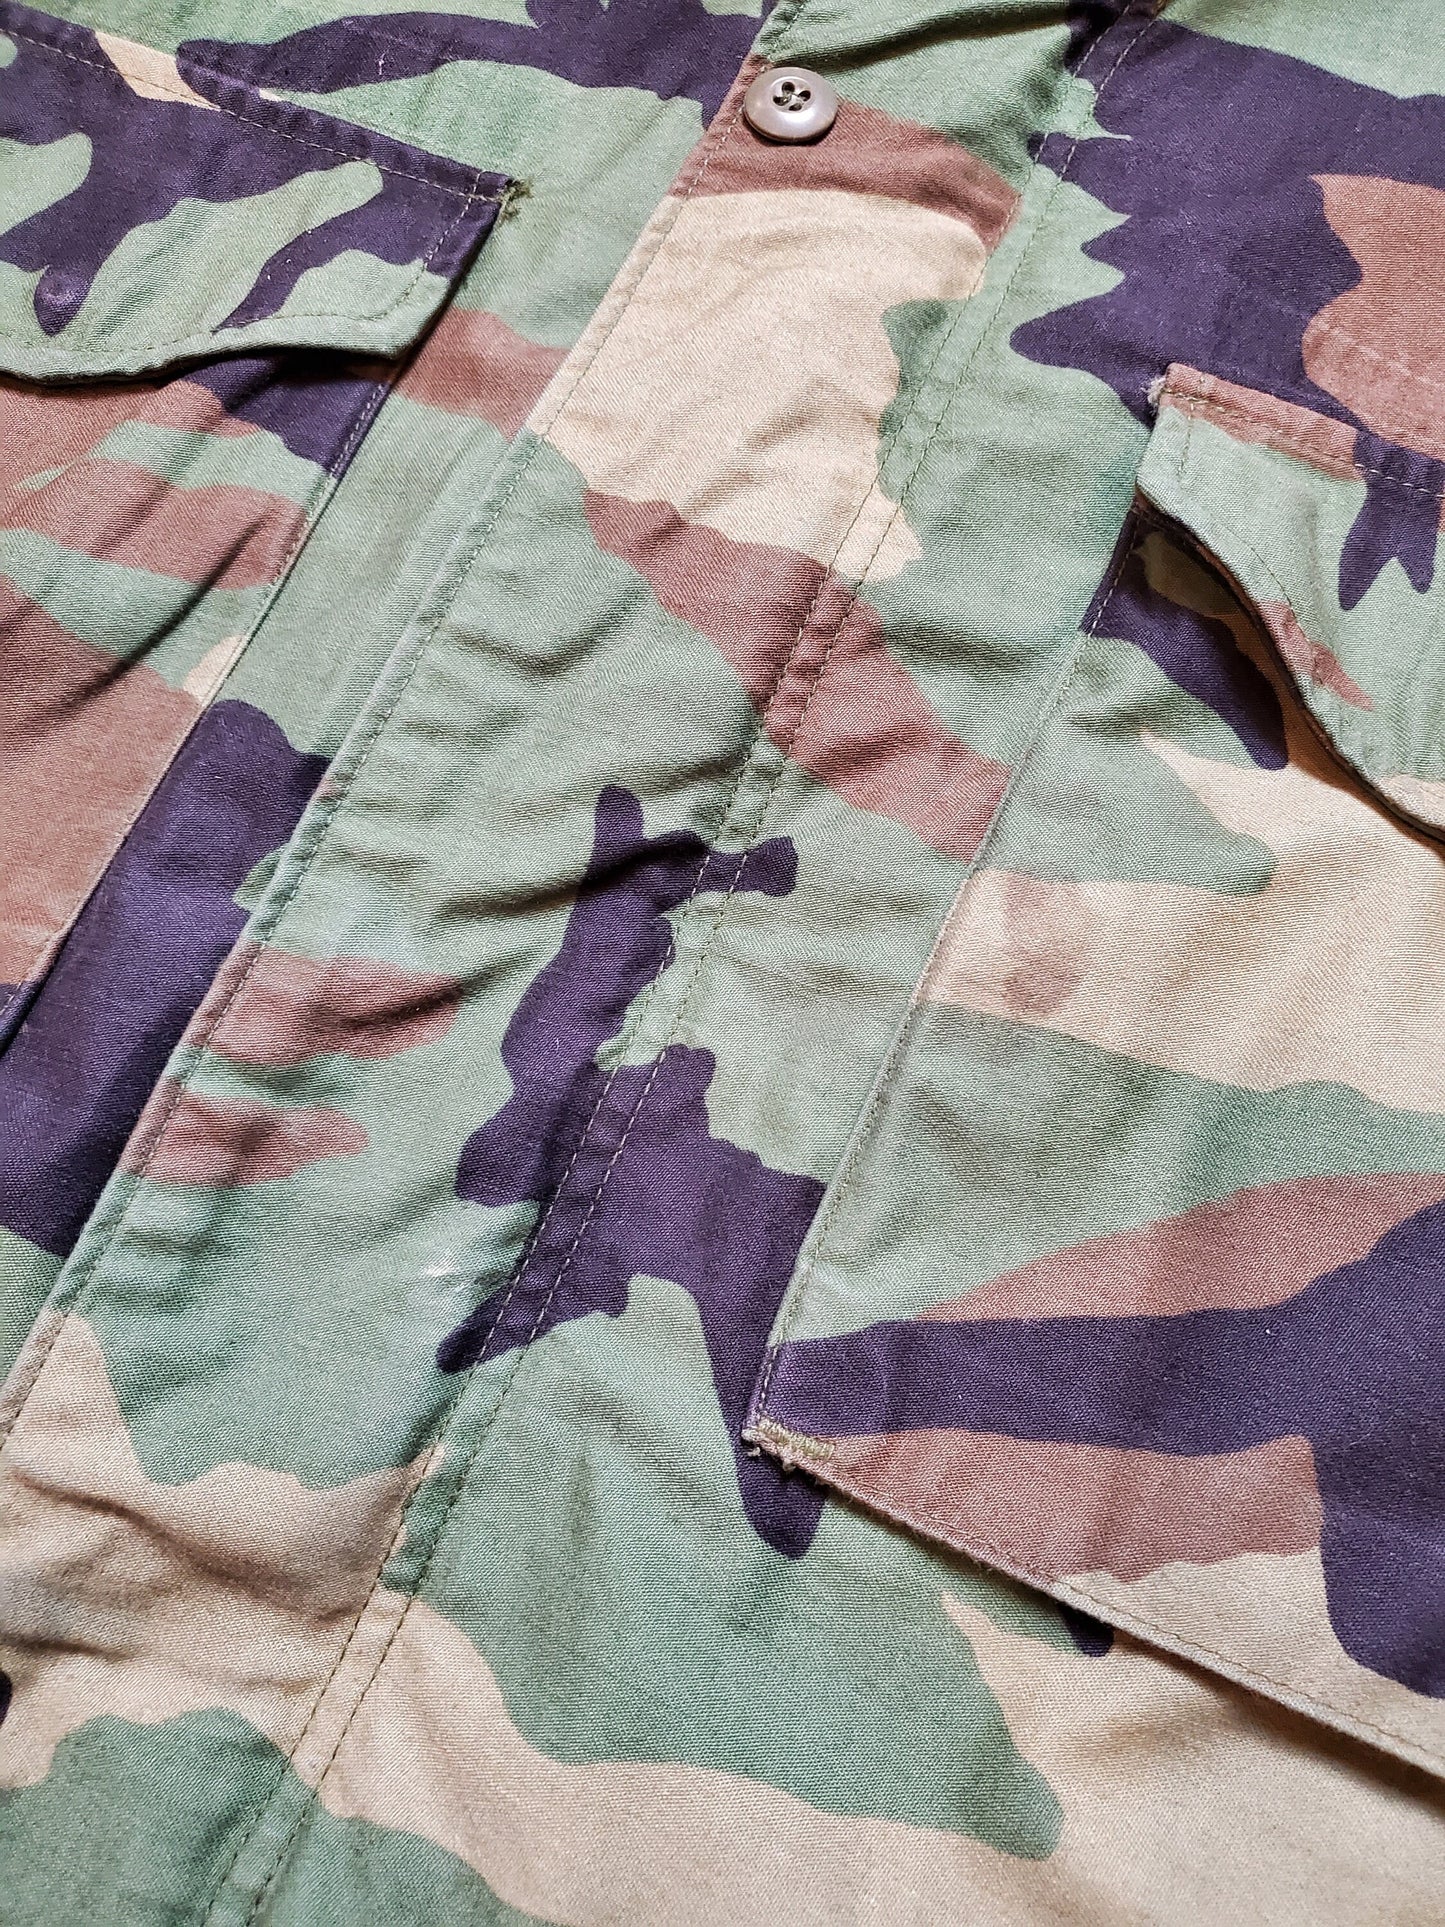 1980s Alpha Industries Woodland Camo M-65 Field Jacket with Removable Liner Made in USA Size M/L